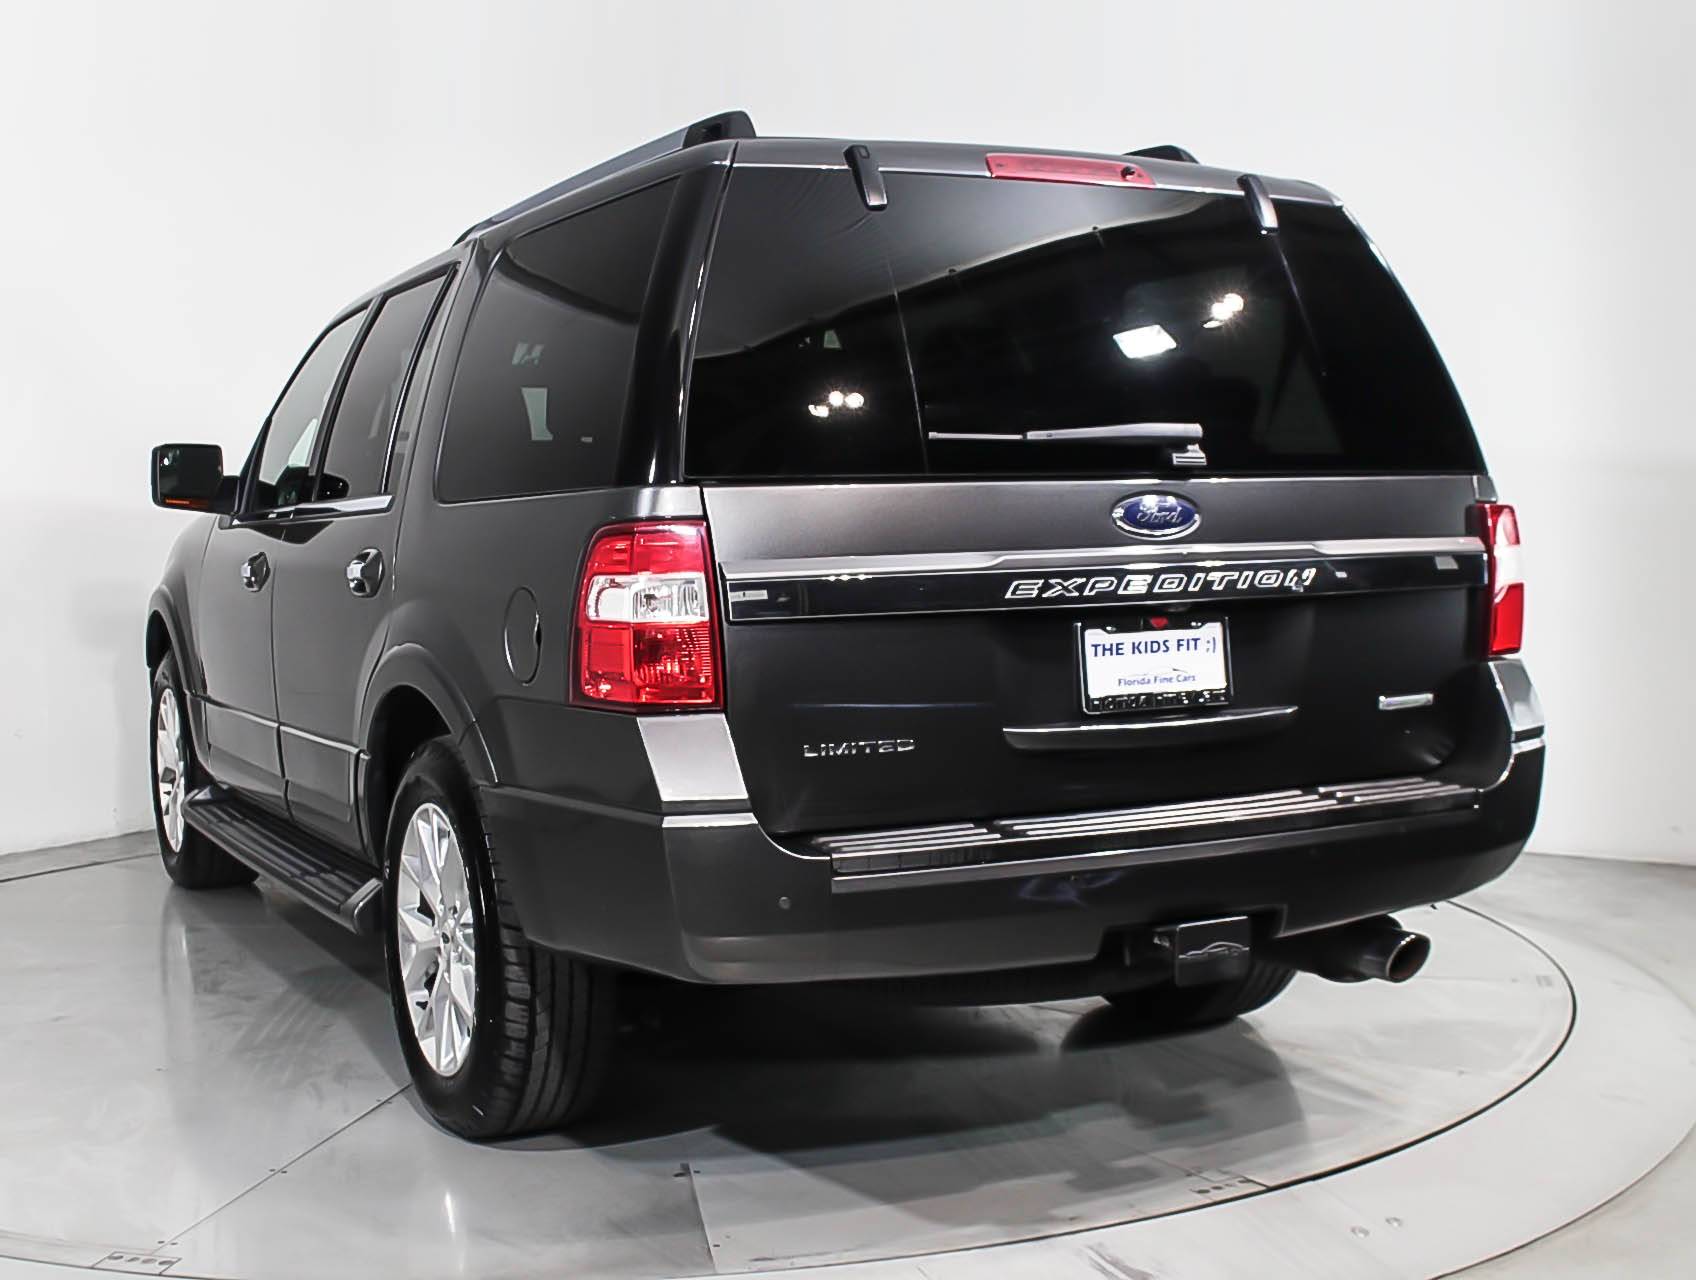 Florida Fine Cars - Used FORD EXPEDITION 2017 MIAMI LIMITED